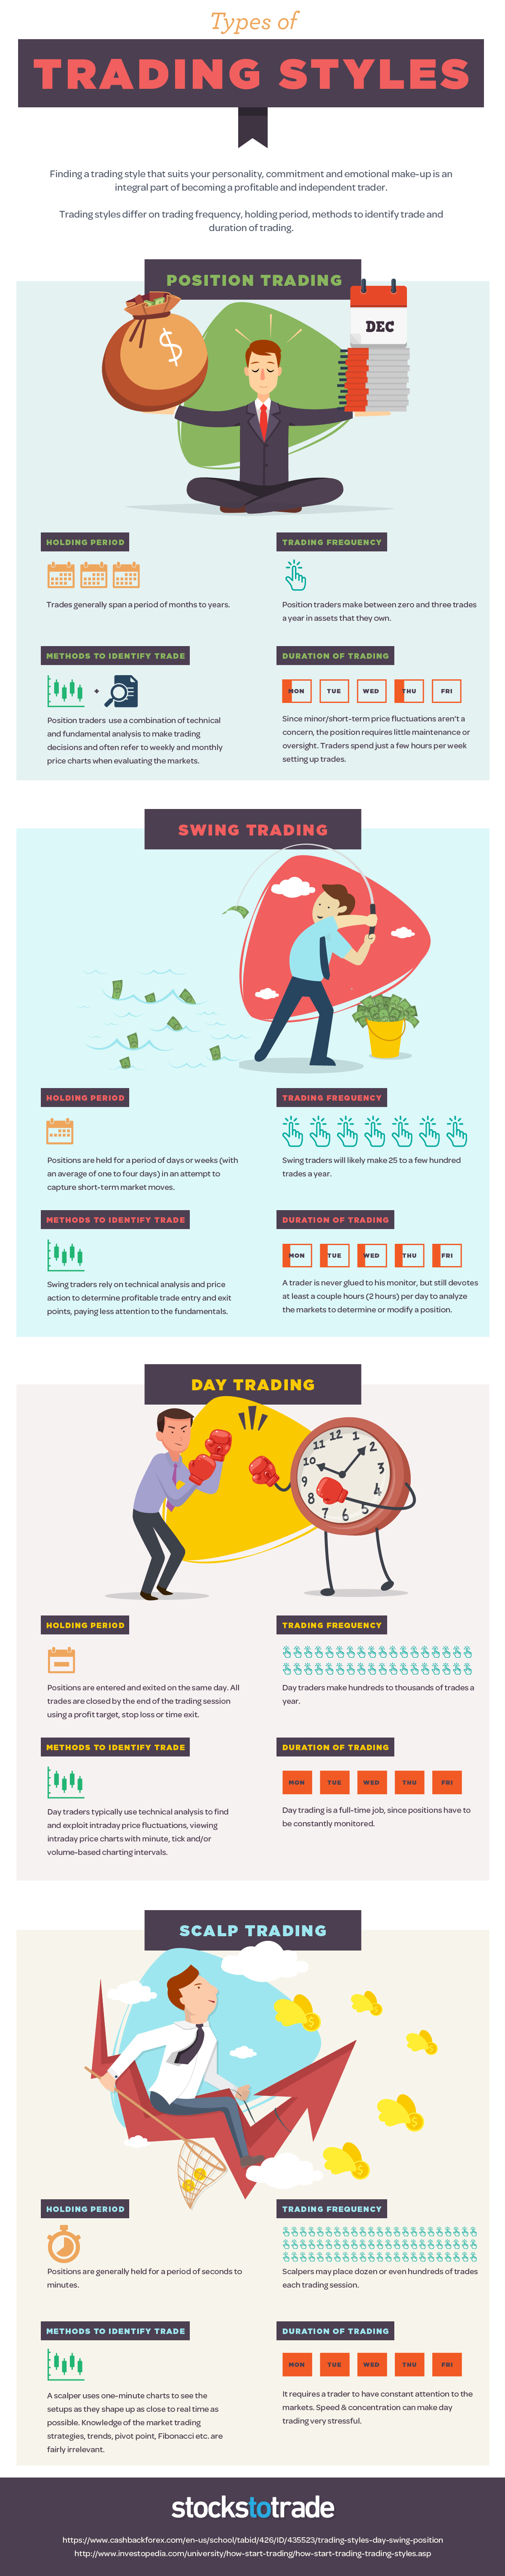 Types of Trading Styles {INFOGRAPHIC}